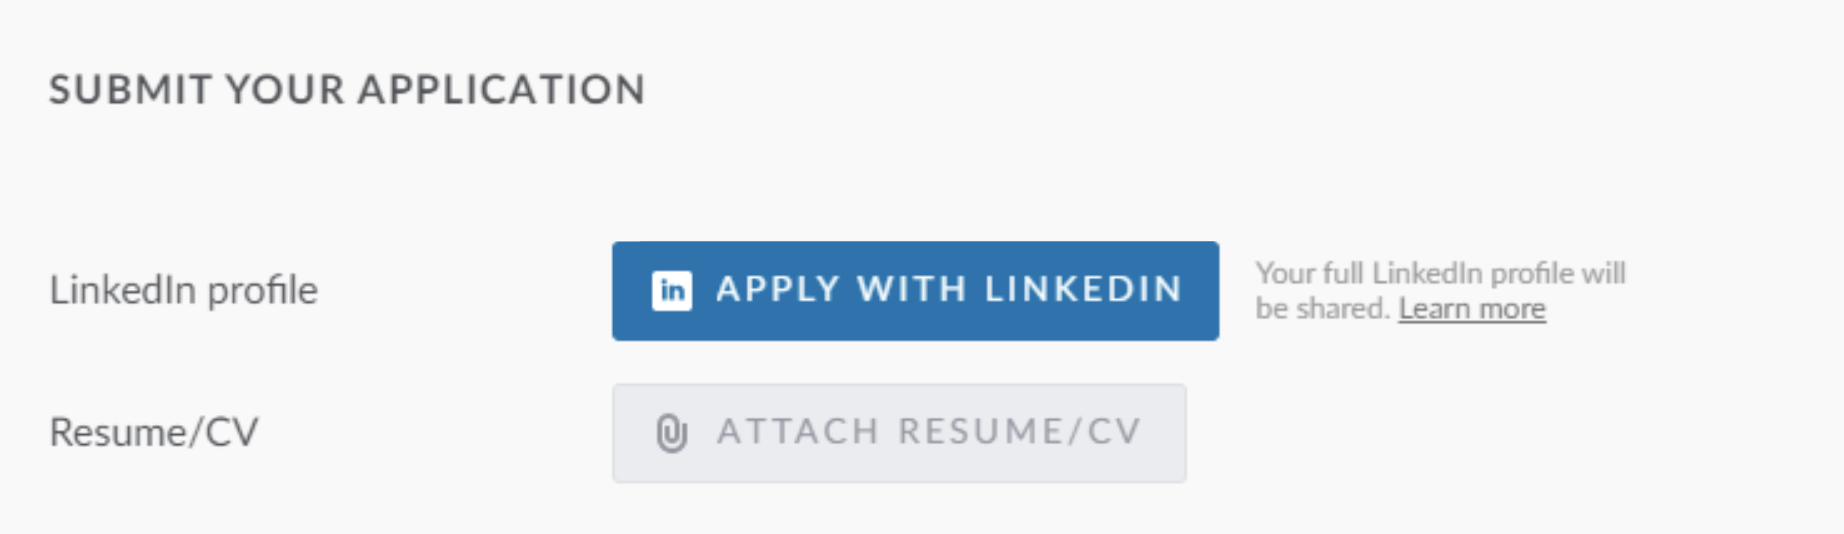 Close up candidate view of application with Apply with LinkedIn button in LinkedIn profile field. Text next to button reads 'Your full LinkedIn profile will be shared.'